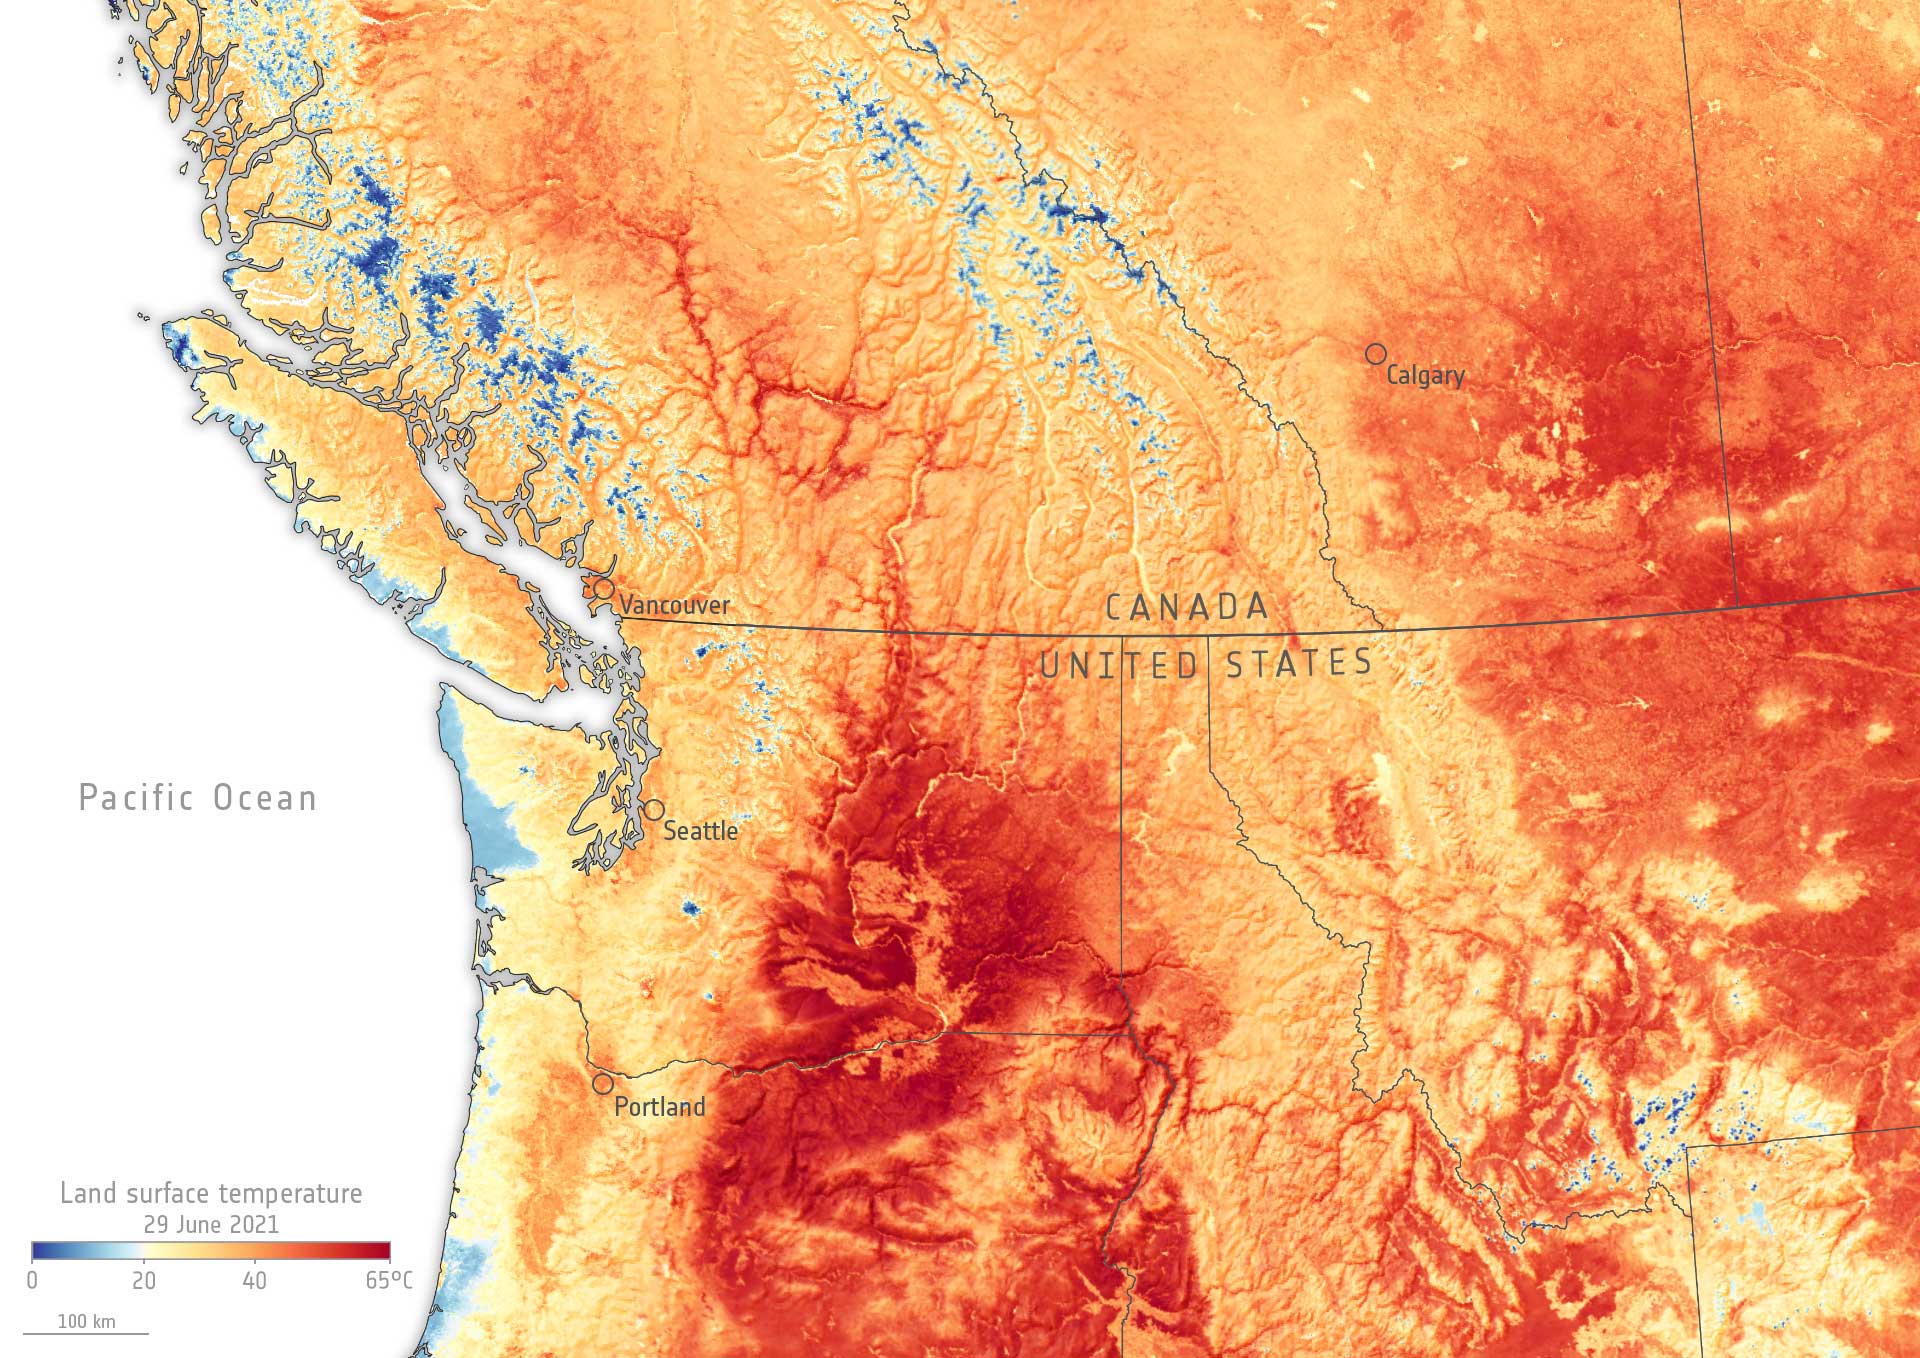 Map colored to show the land surface temperature of southwestern Canada and the northwestern U.S. during the heat dome of June 2021. The map shows cooler areas in blue and warmer areas in orange and red. Much of the map is colored orange or red, indicating high land surface temperatures.